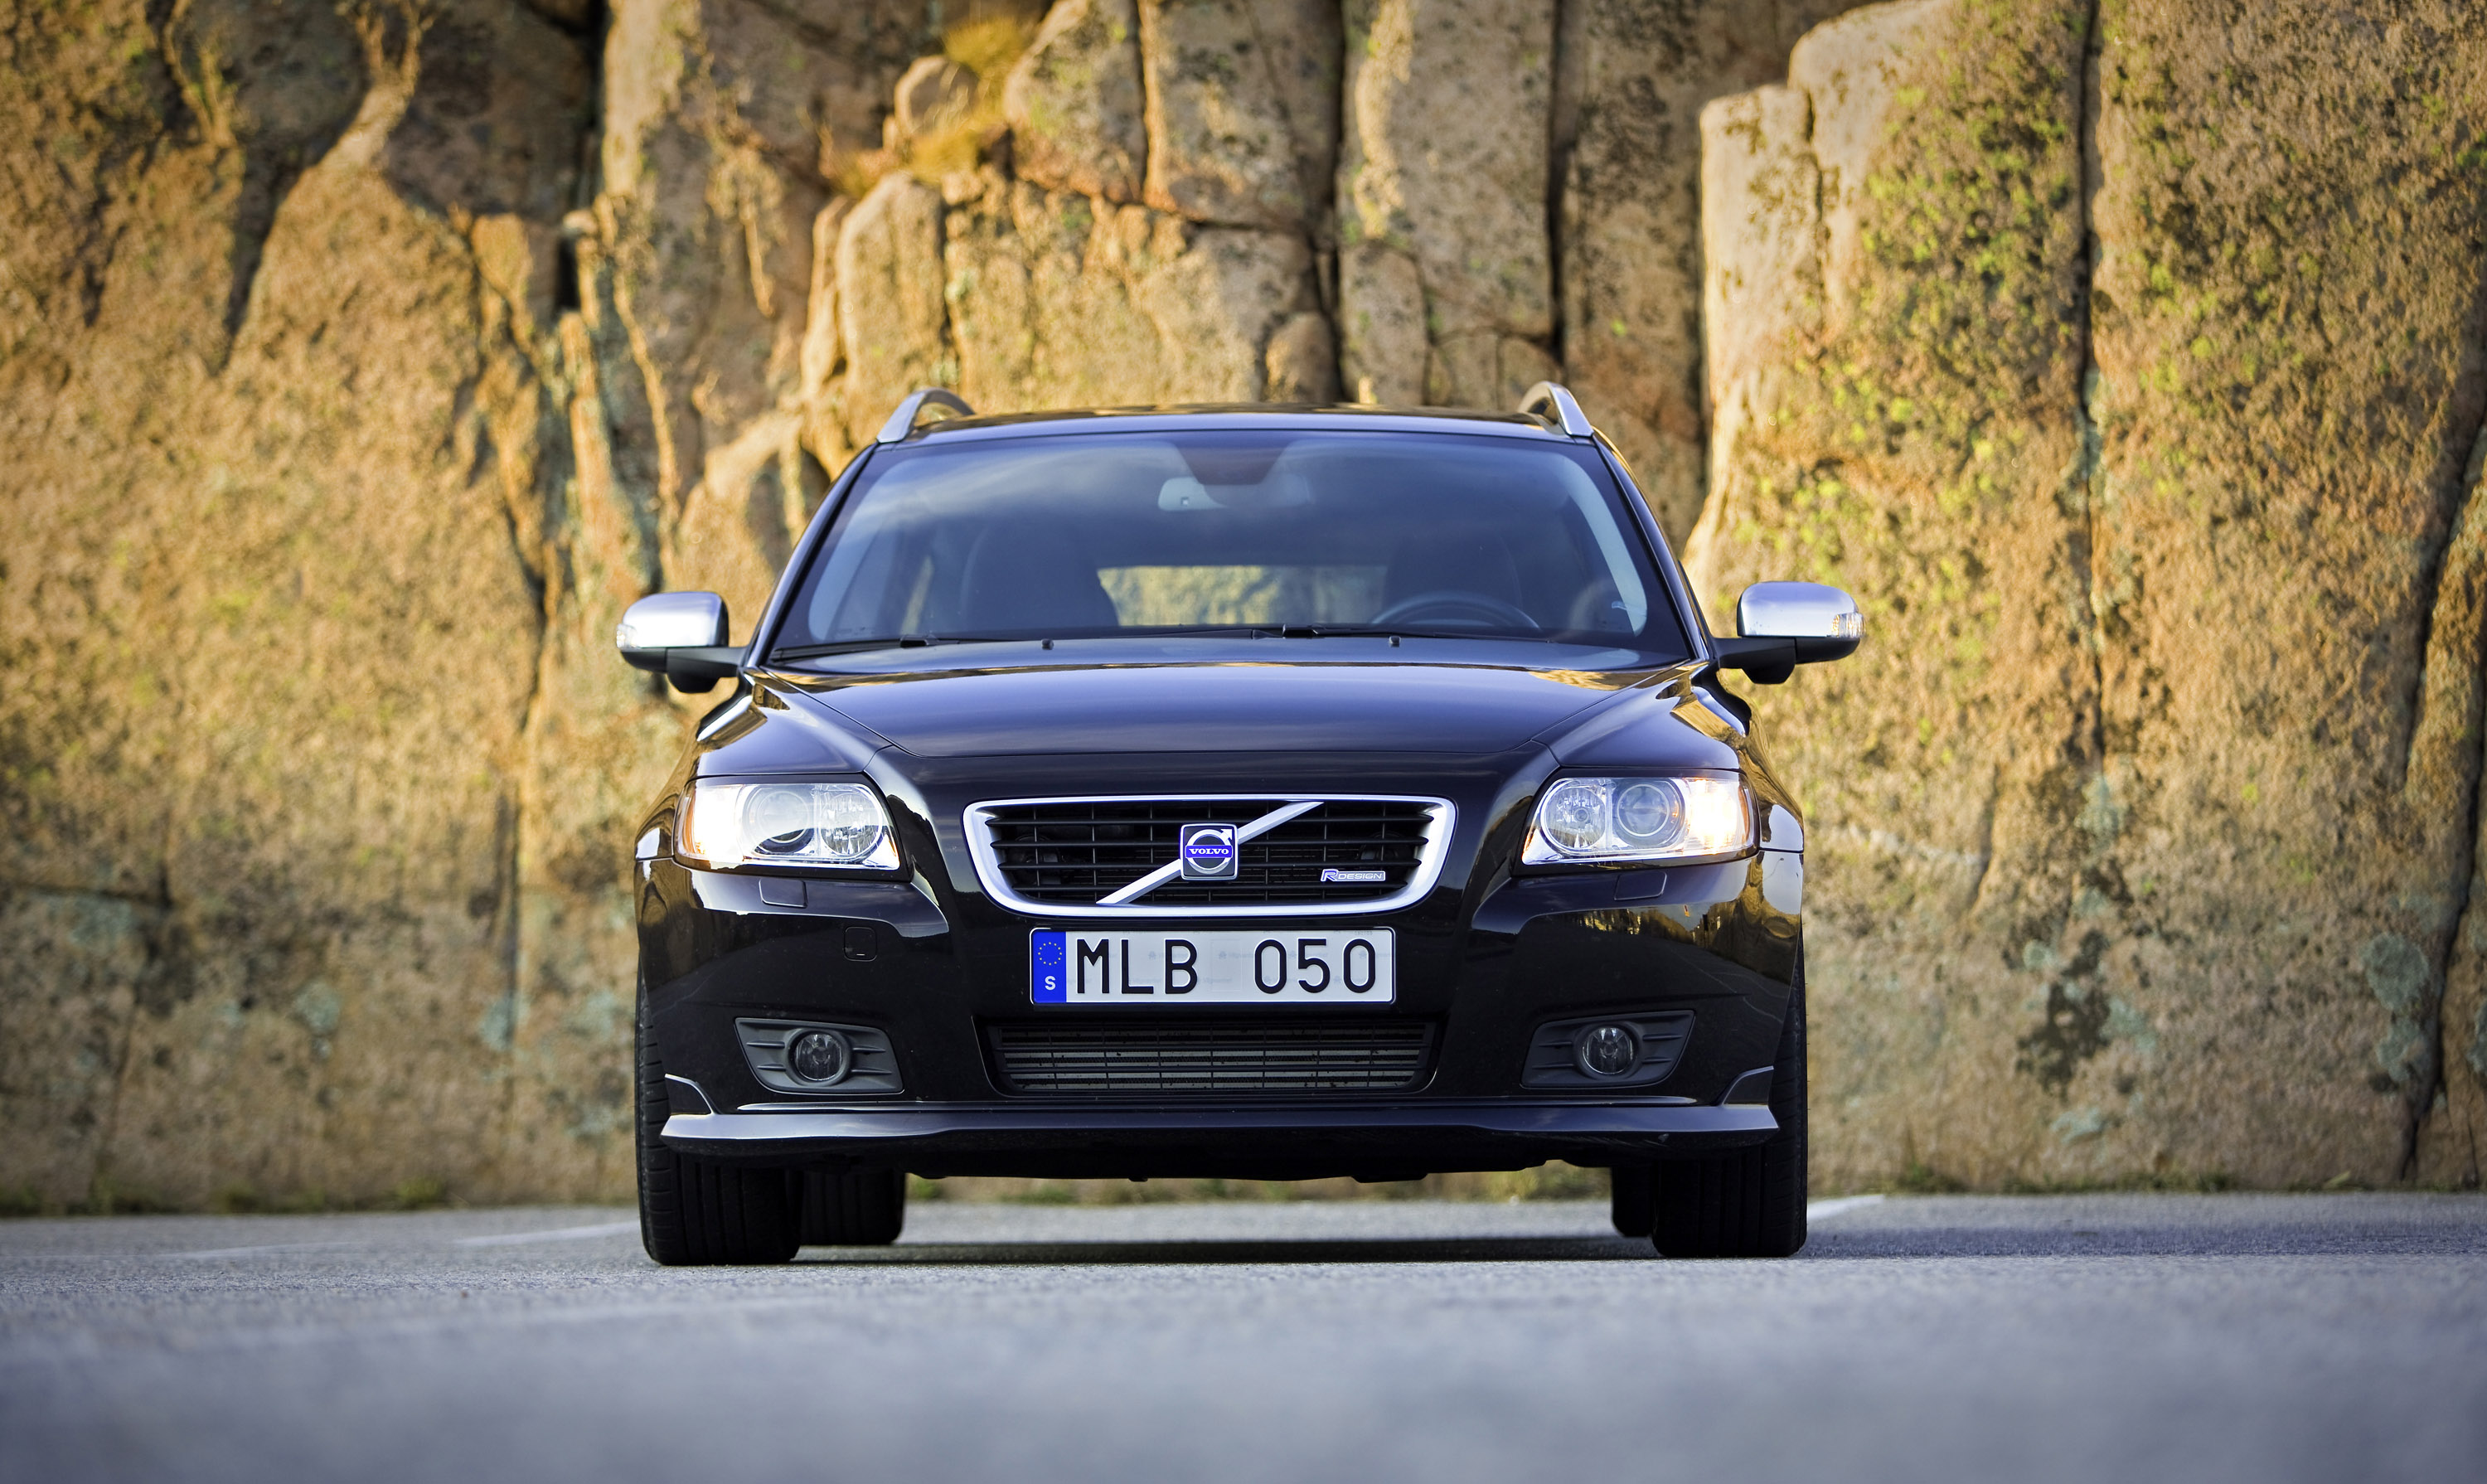 Volvo V50 Picture 1 of 15, 2010